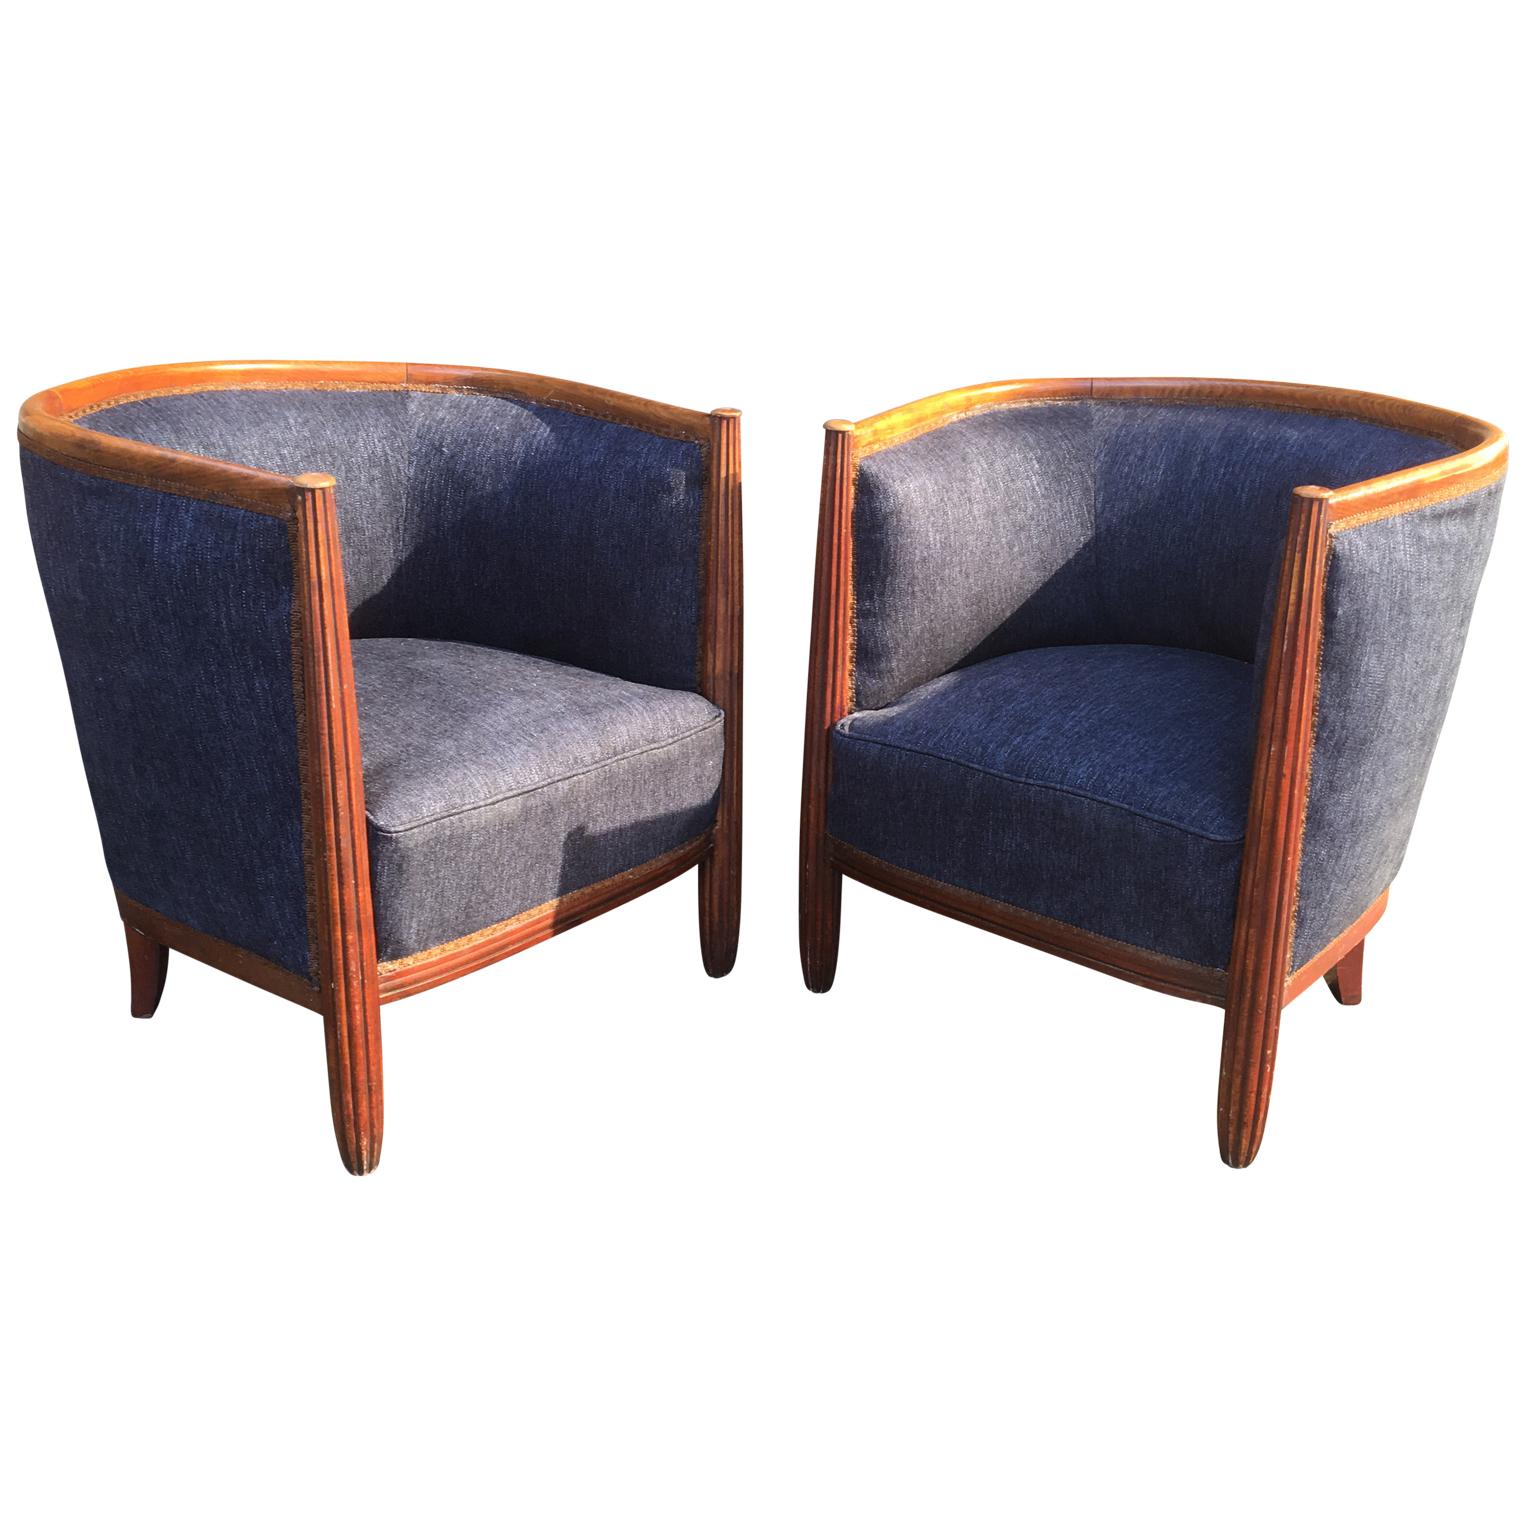 20th Century Pair of French Art Deco Barrel Club Chairs.